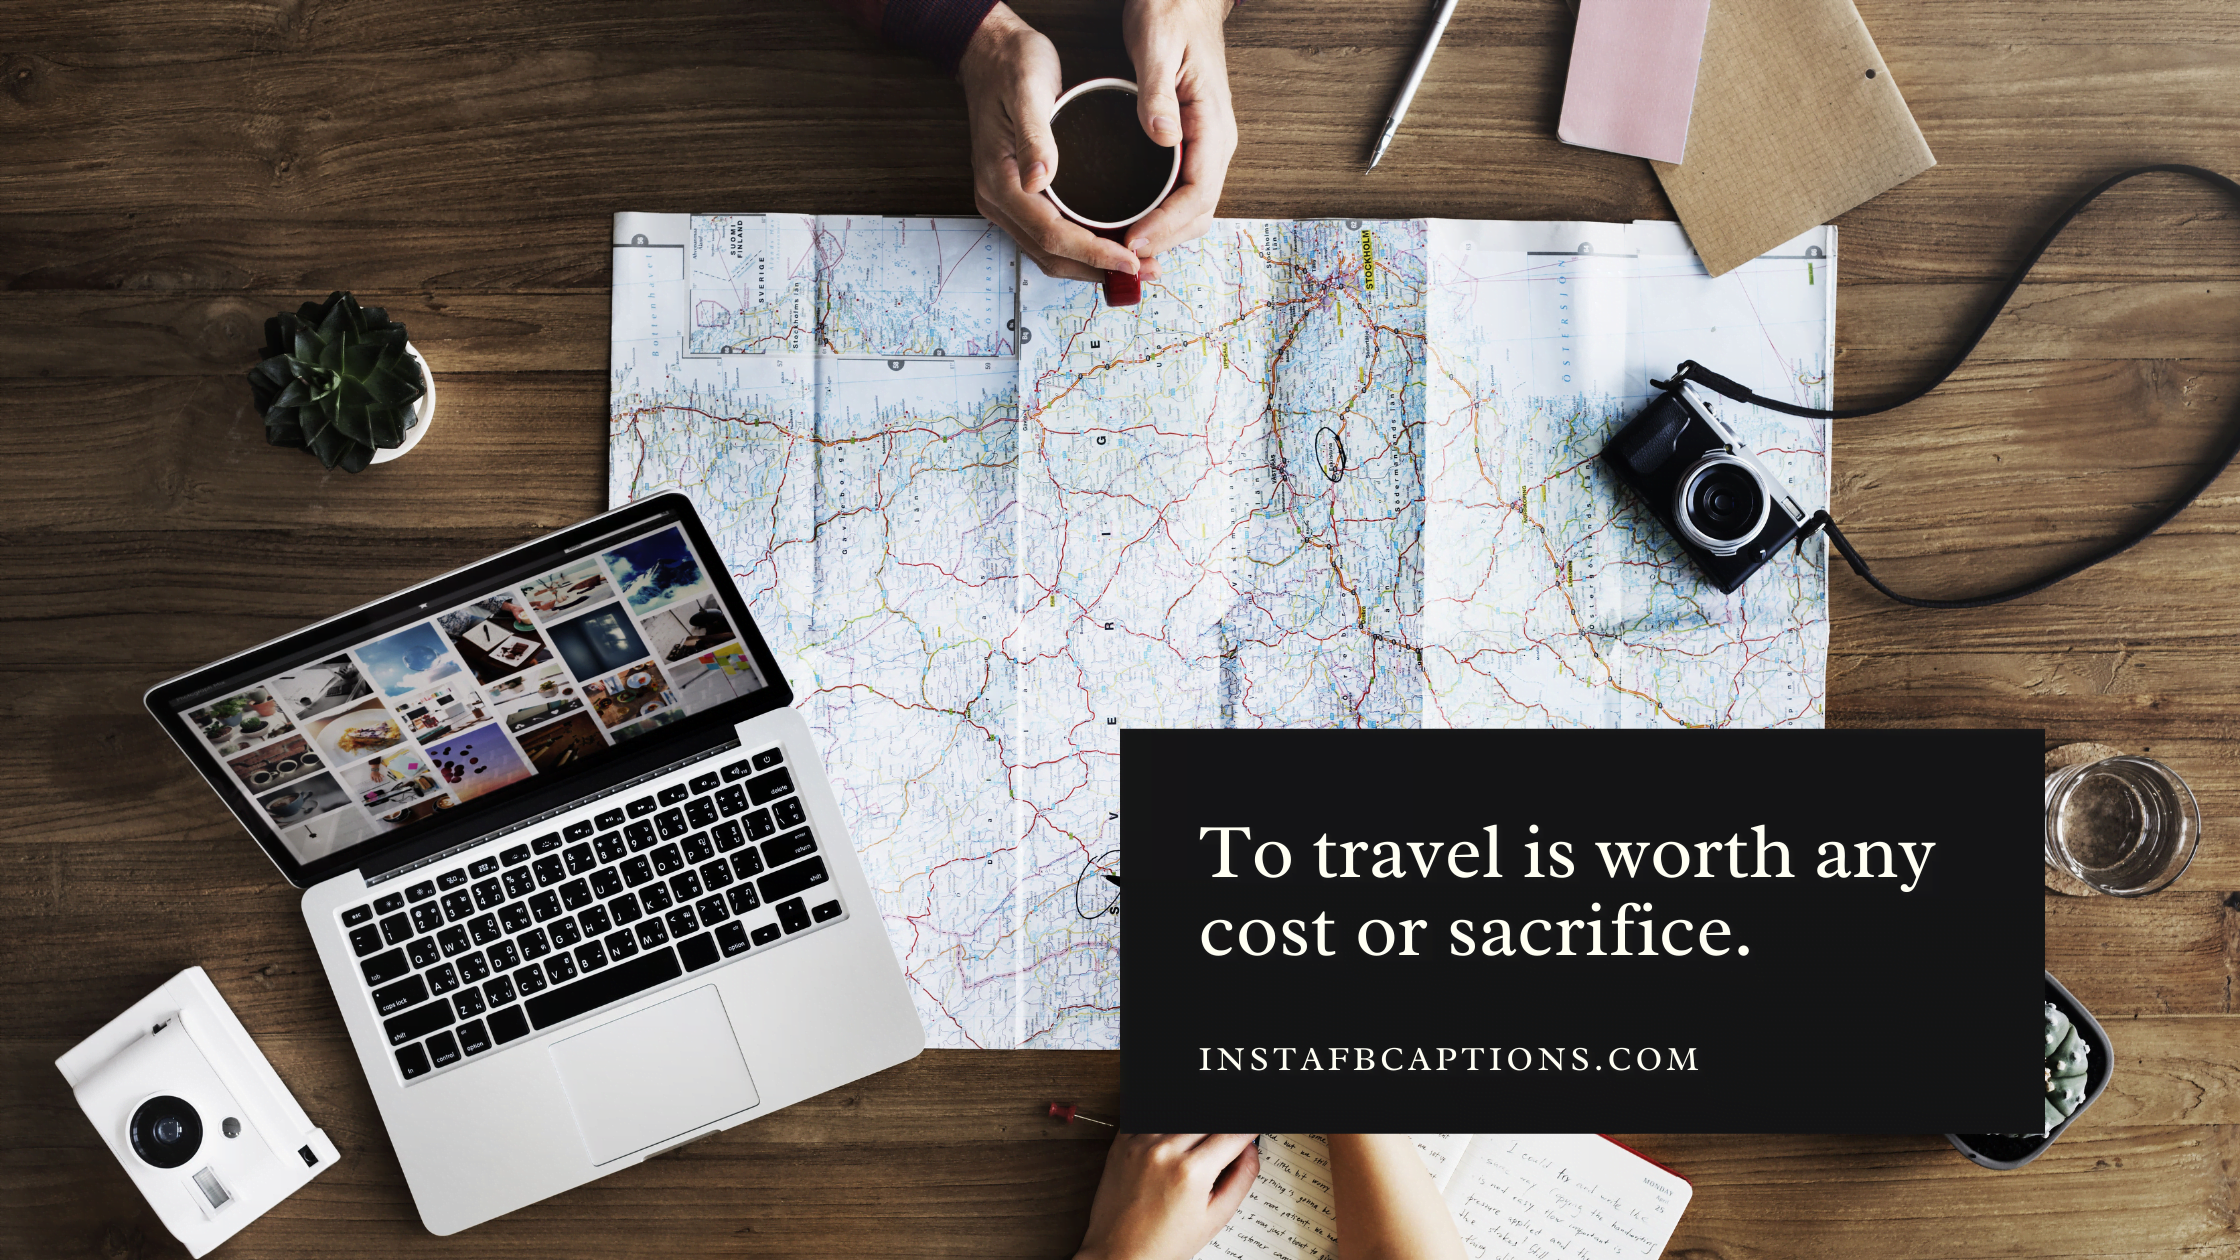 To travel is worth any cost or sacrifice  - Travel Quote Captions - Travel Captions For Travelling Instagram Reels in 2023